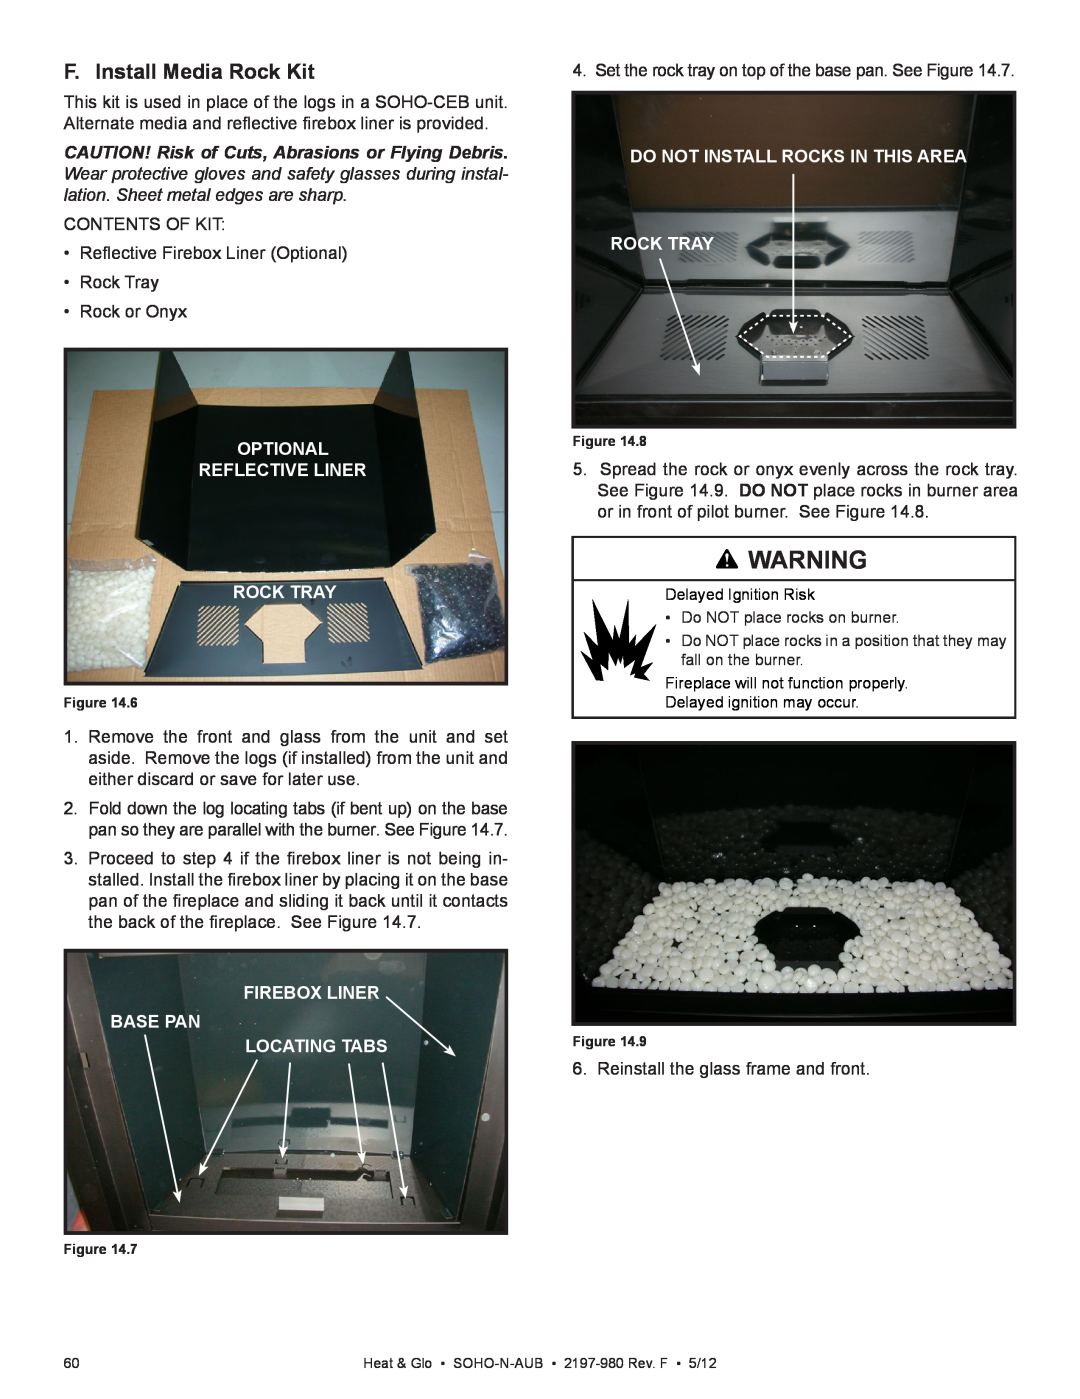 Heat & Glo LifeStyle 2197-980 owner manual F. Install Media Rock Kit, Optional Reflective Liner Rock Tray 